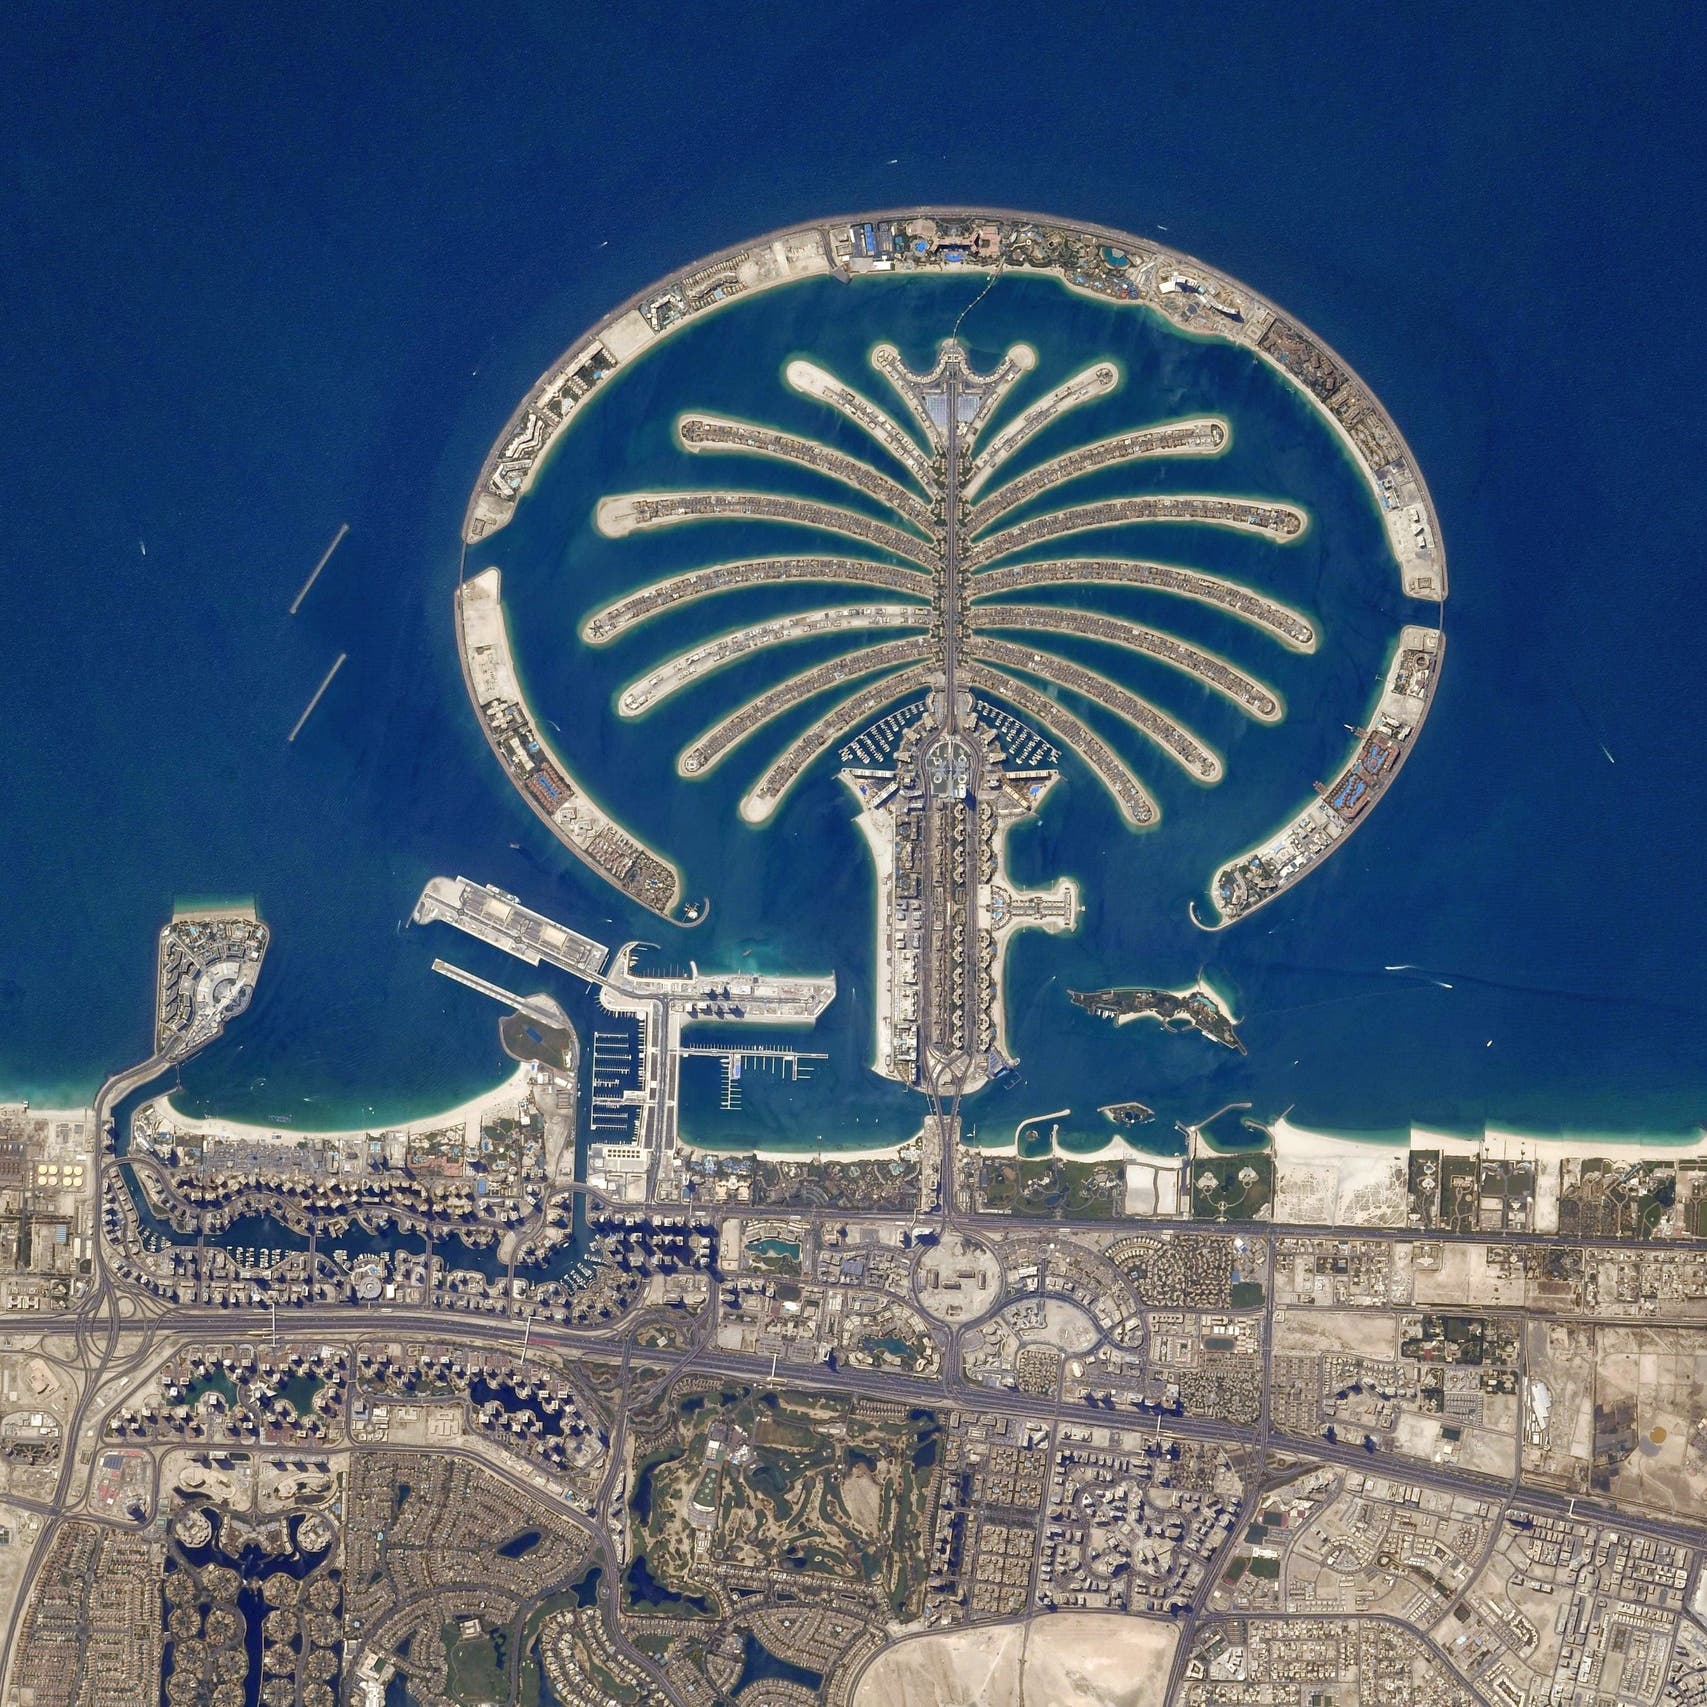 ‘Hello Dubai!’ US astronaut shares two images of UAE city from space